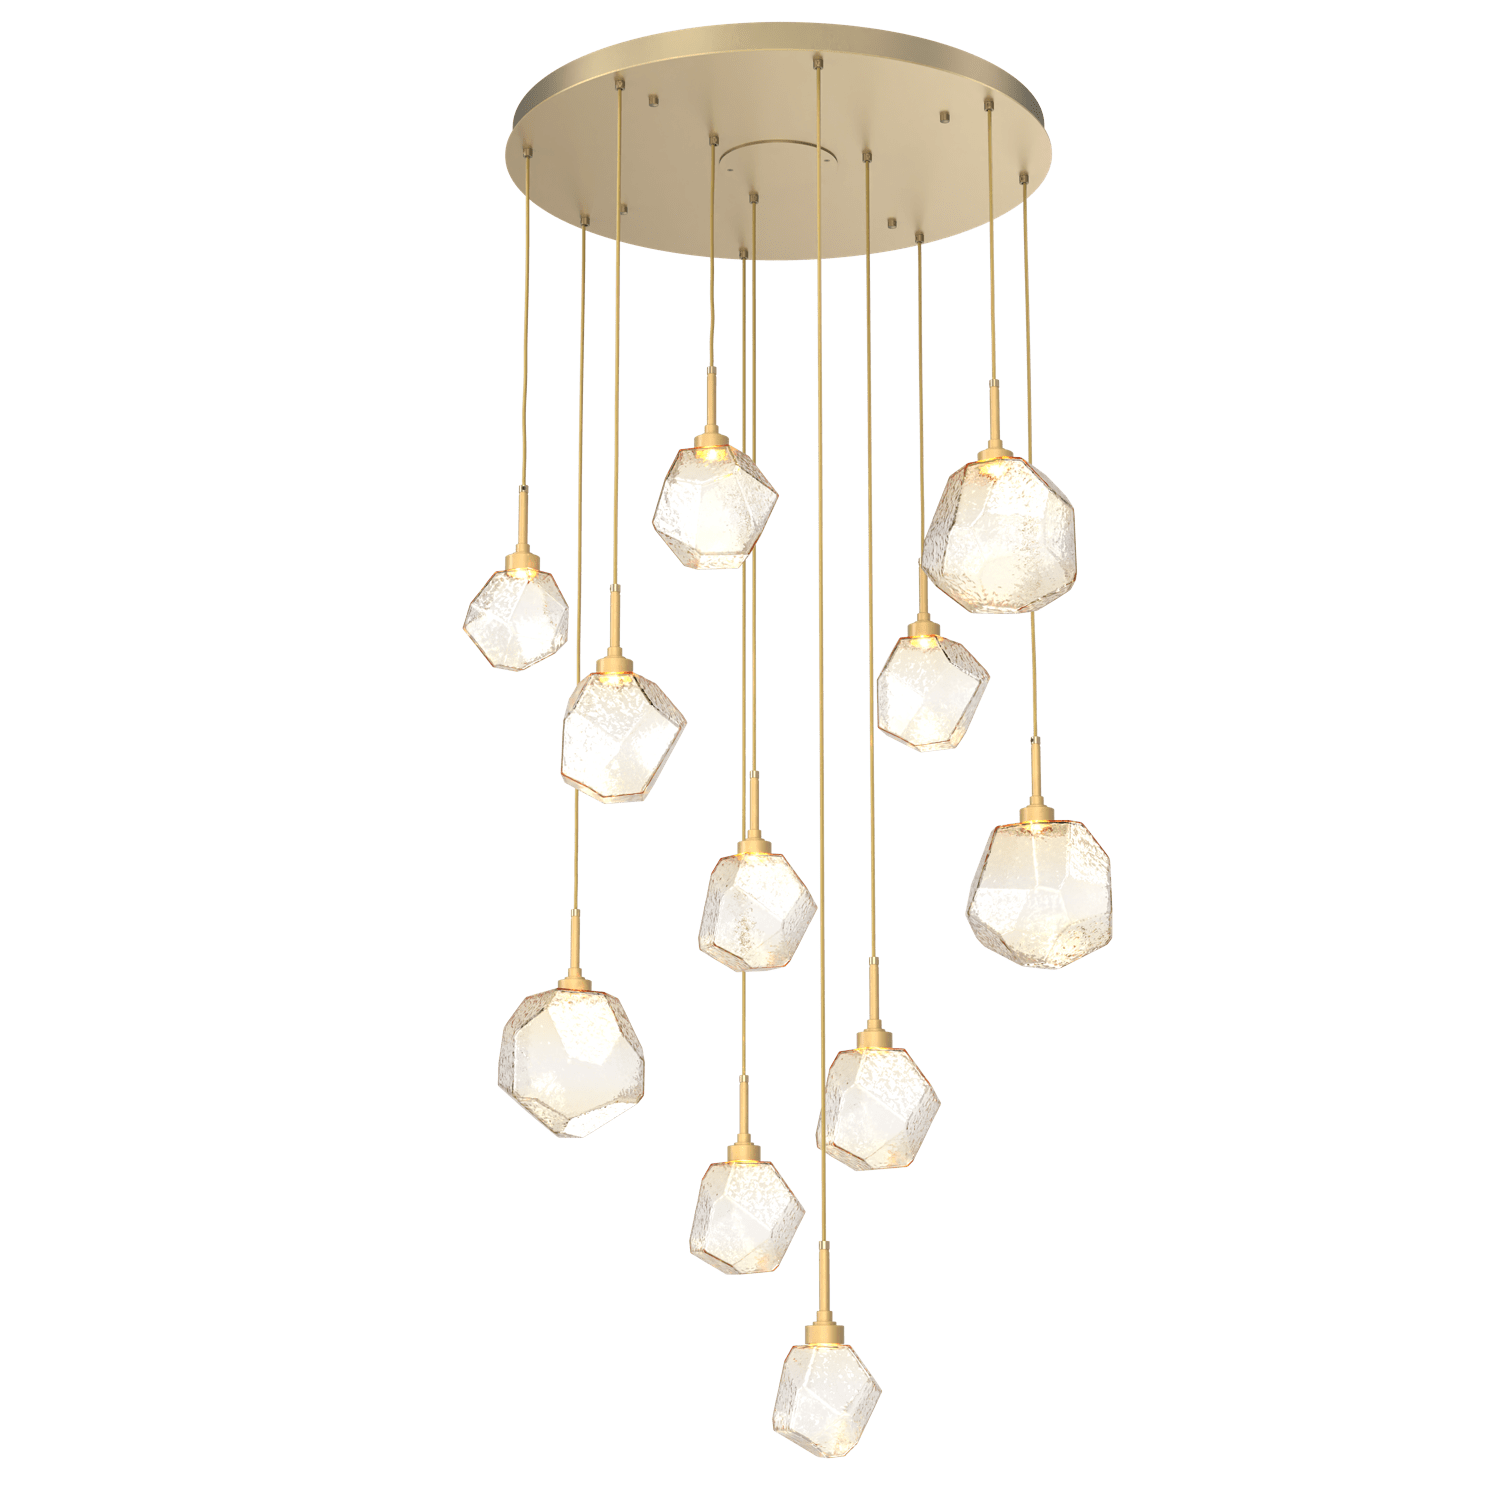 CHB0039-11-GB-A-Hammerton-Studio-Gem-11-light-round-pendant-chandelier-with-gilded-brass-finish-and-amber-blown-glass-shades-and-LED-lamping